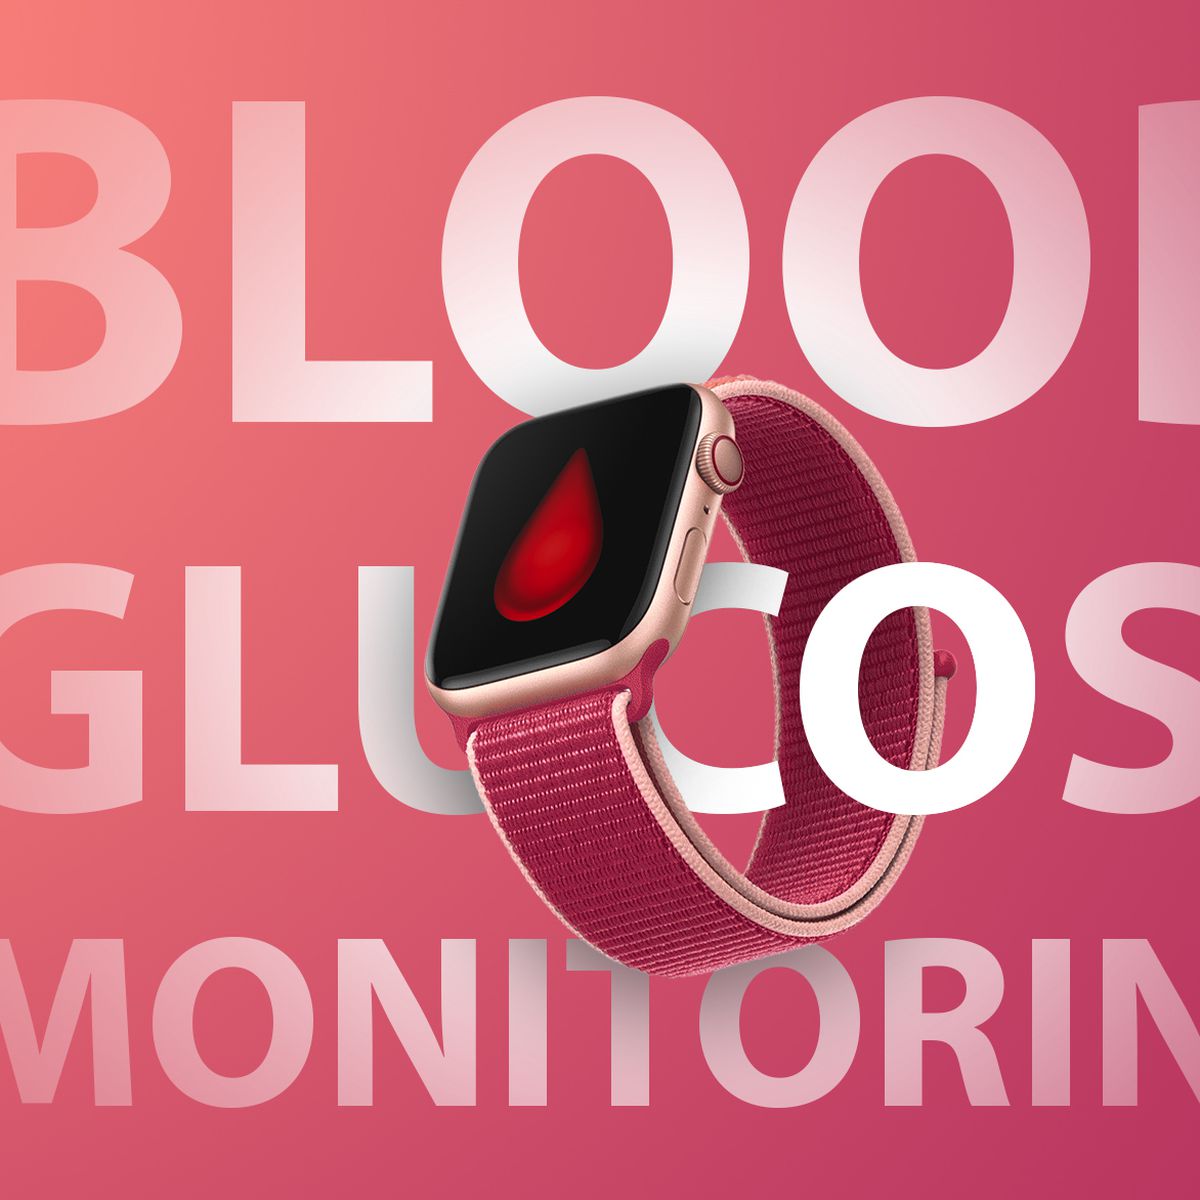 https://images.macrumors.com/t/3st-Y7RBKerY2gfv1mAwMejuIFc=/1200x1200/smart/article-new/2021/01/apple-watch-blood-glucose-feature.jpg